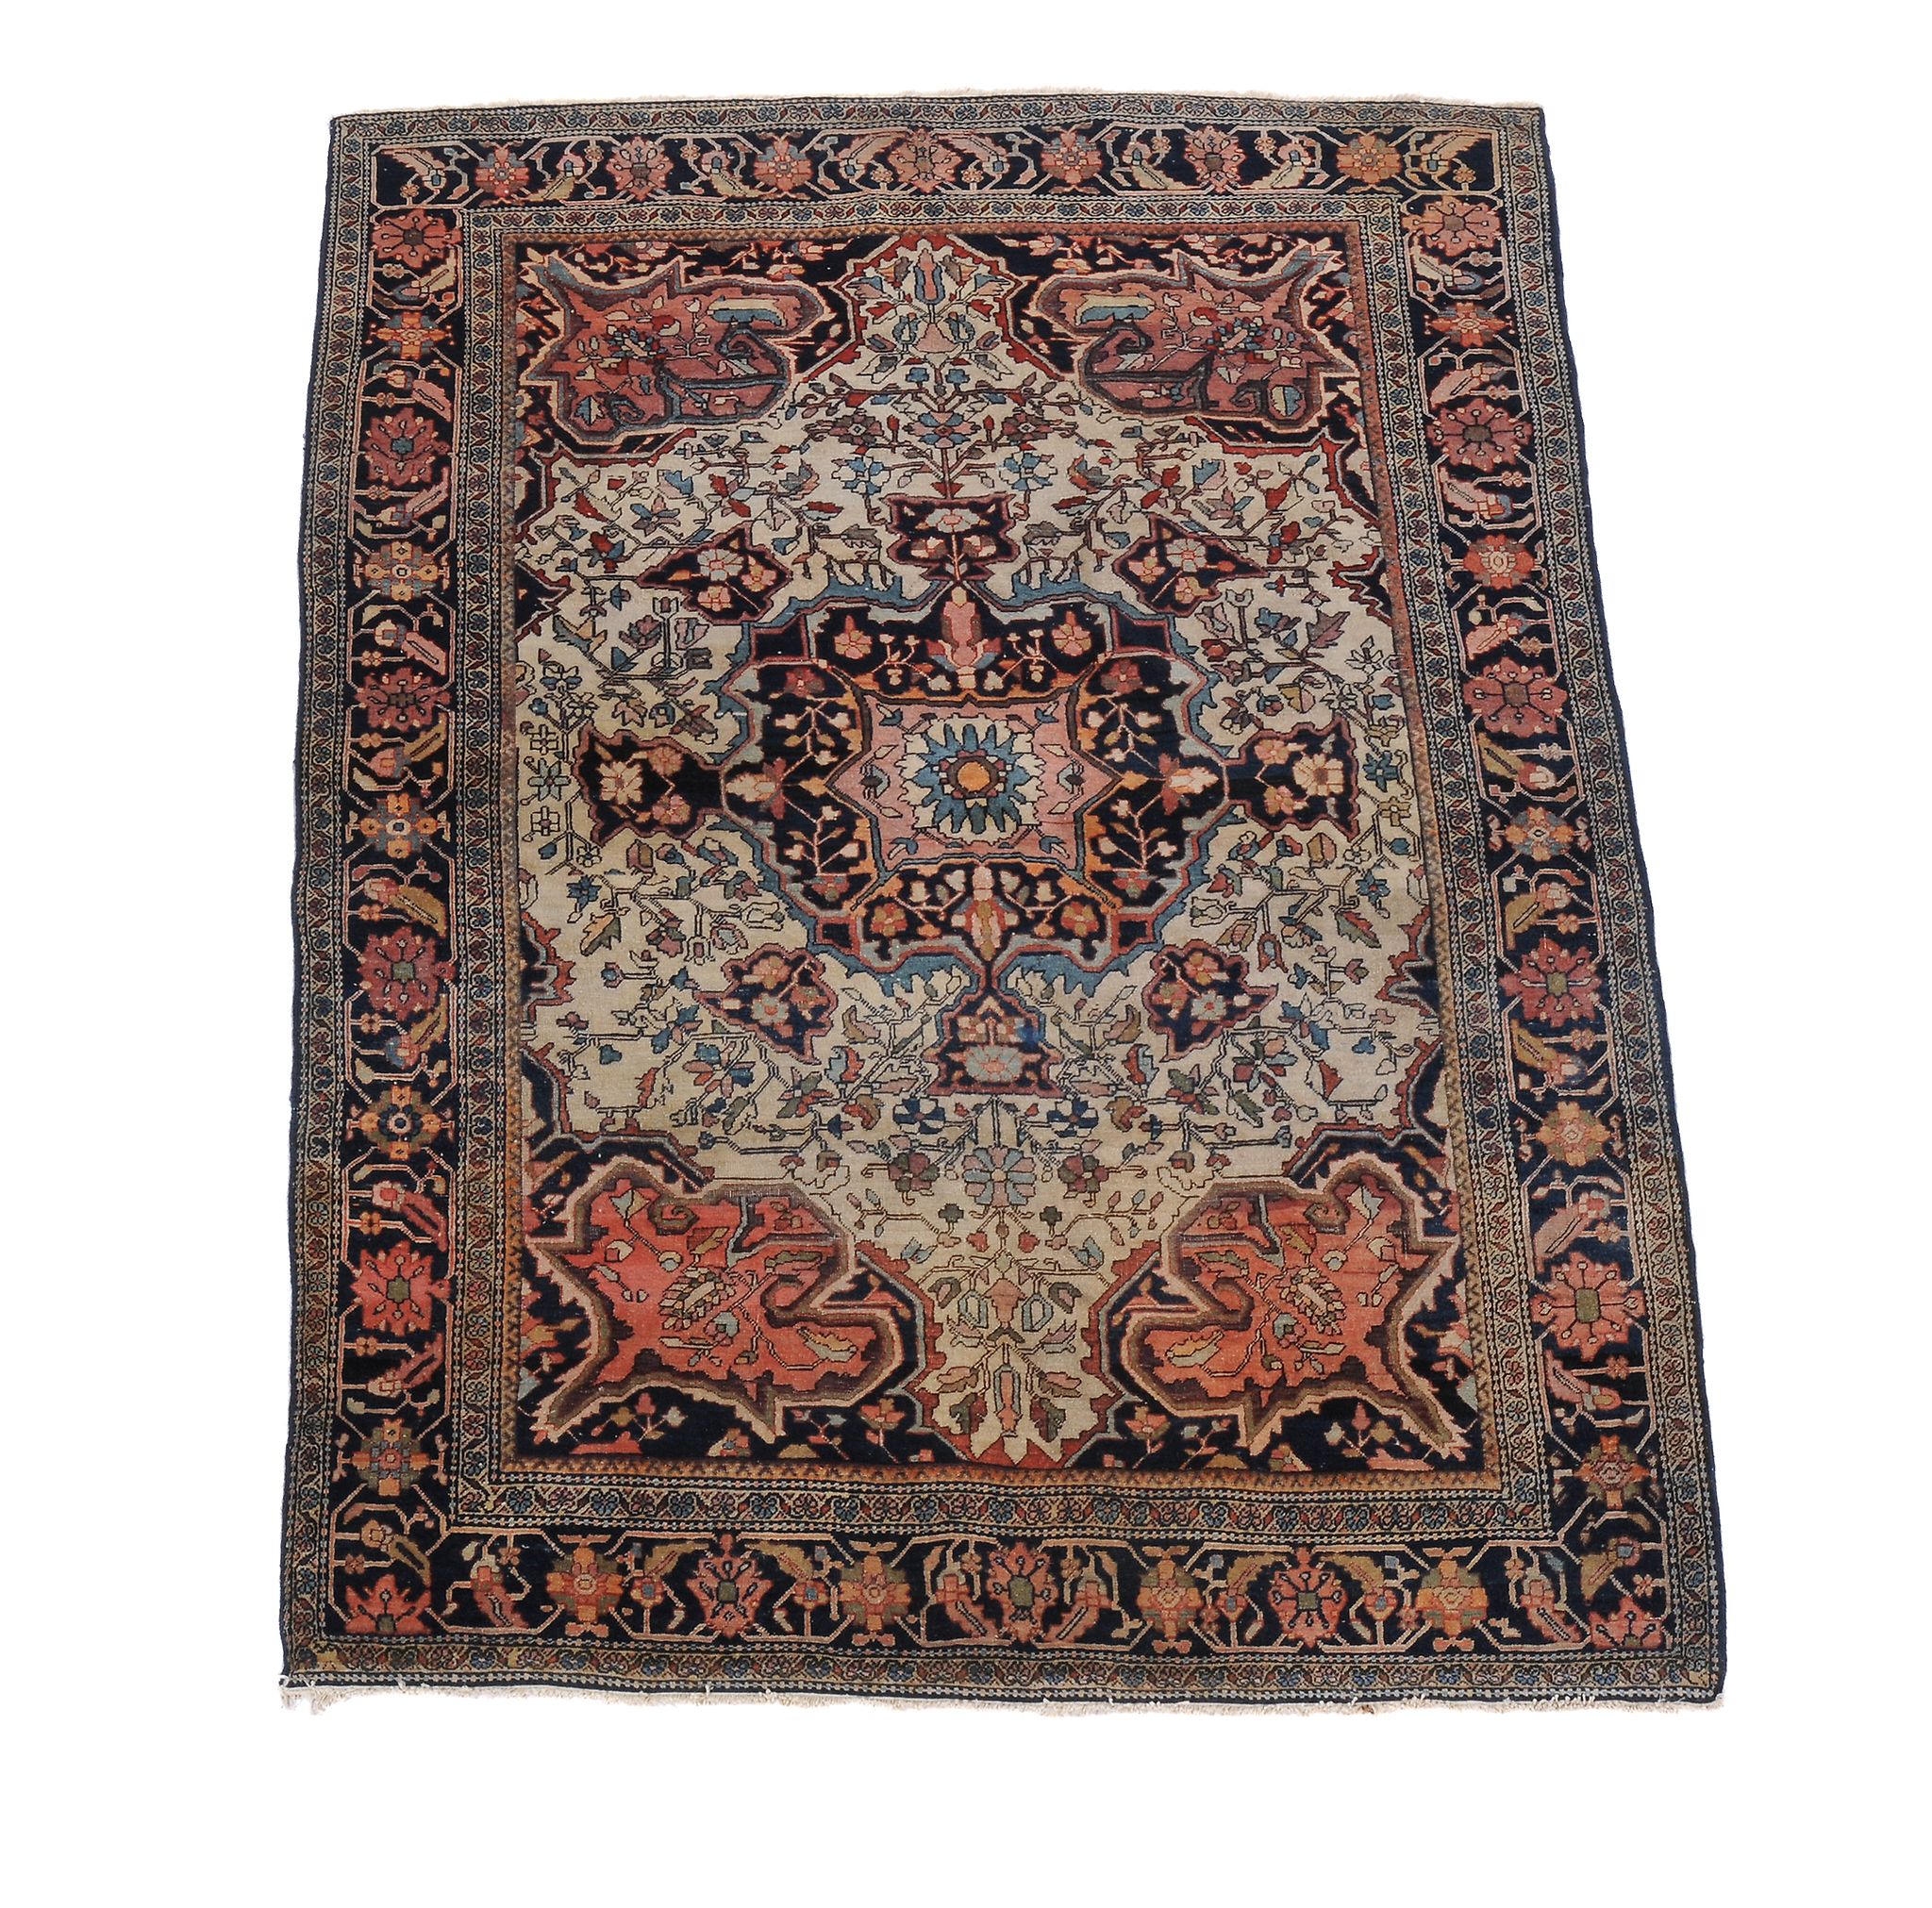 A Sarouk Feraghan rug, the cream field profusely decorated with flowerheads and foliage in